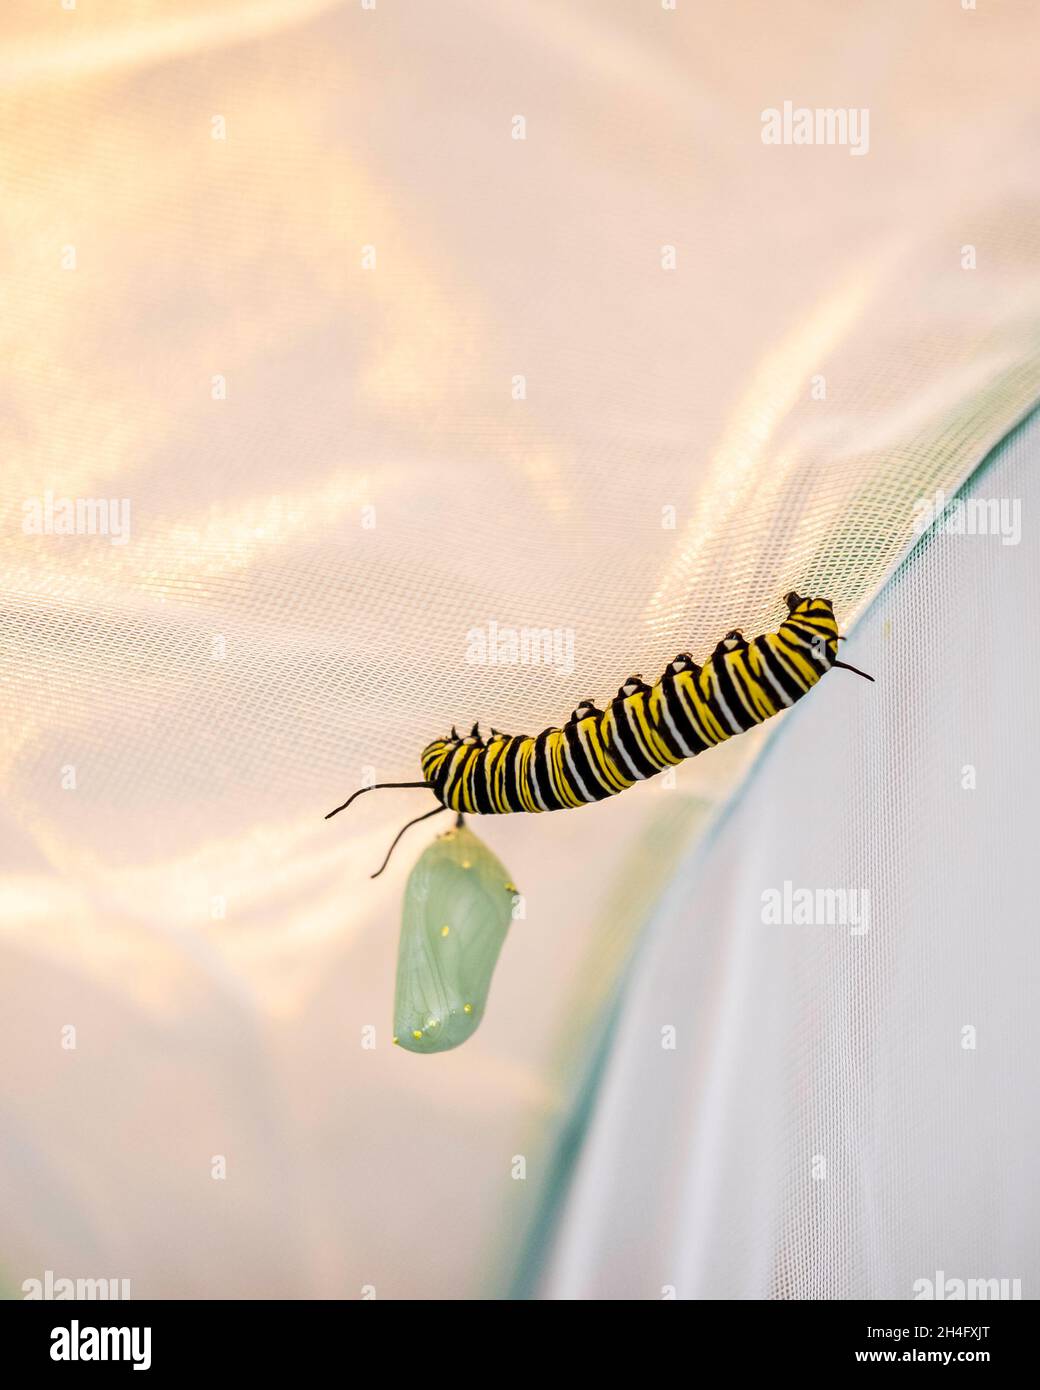 A Monarch caterpillar, Danaus plexippus, clings to the top of a butterfly cage next to a Monarch chrysalis. USA. Stock Photo